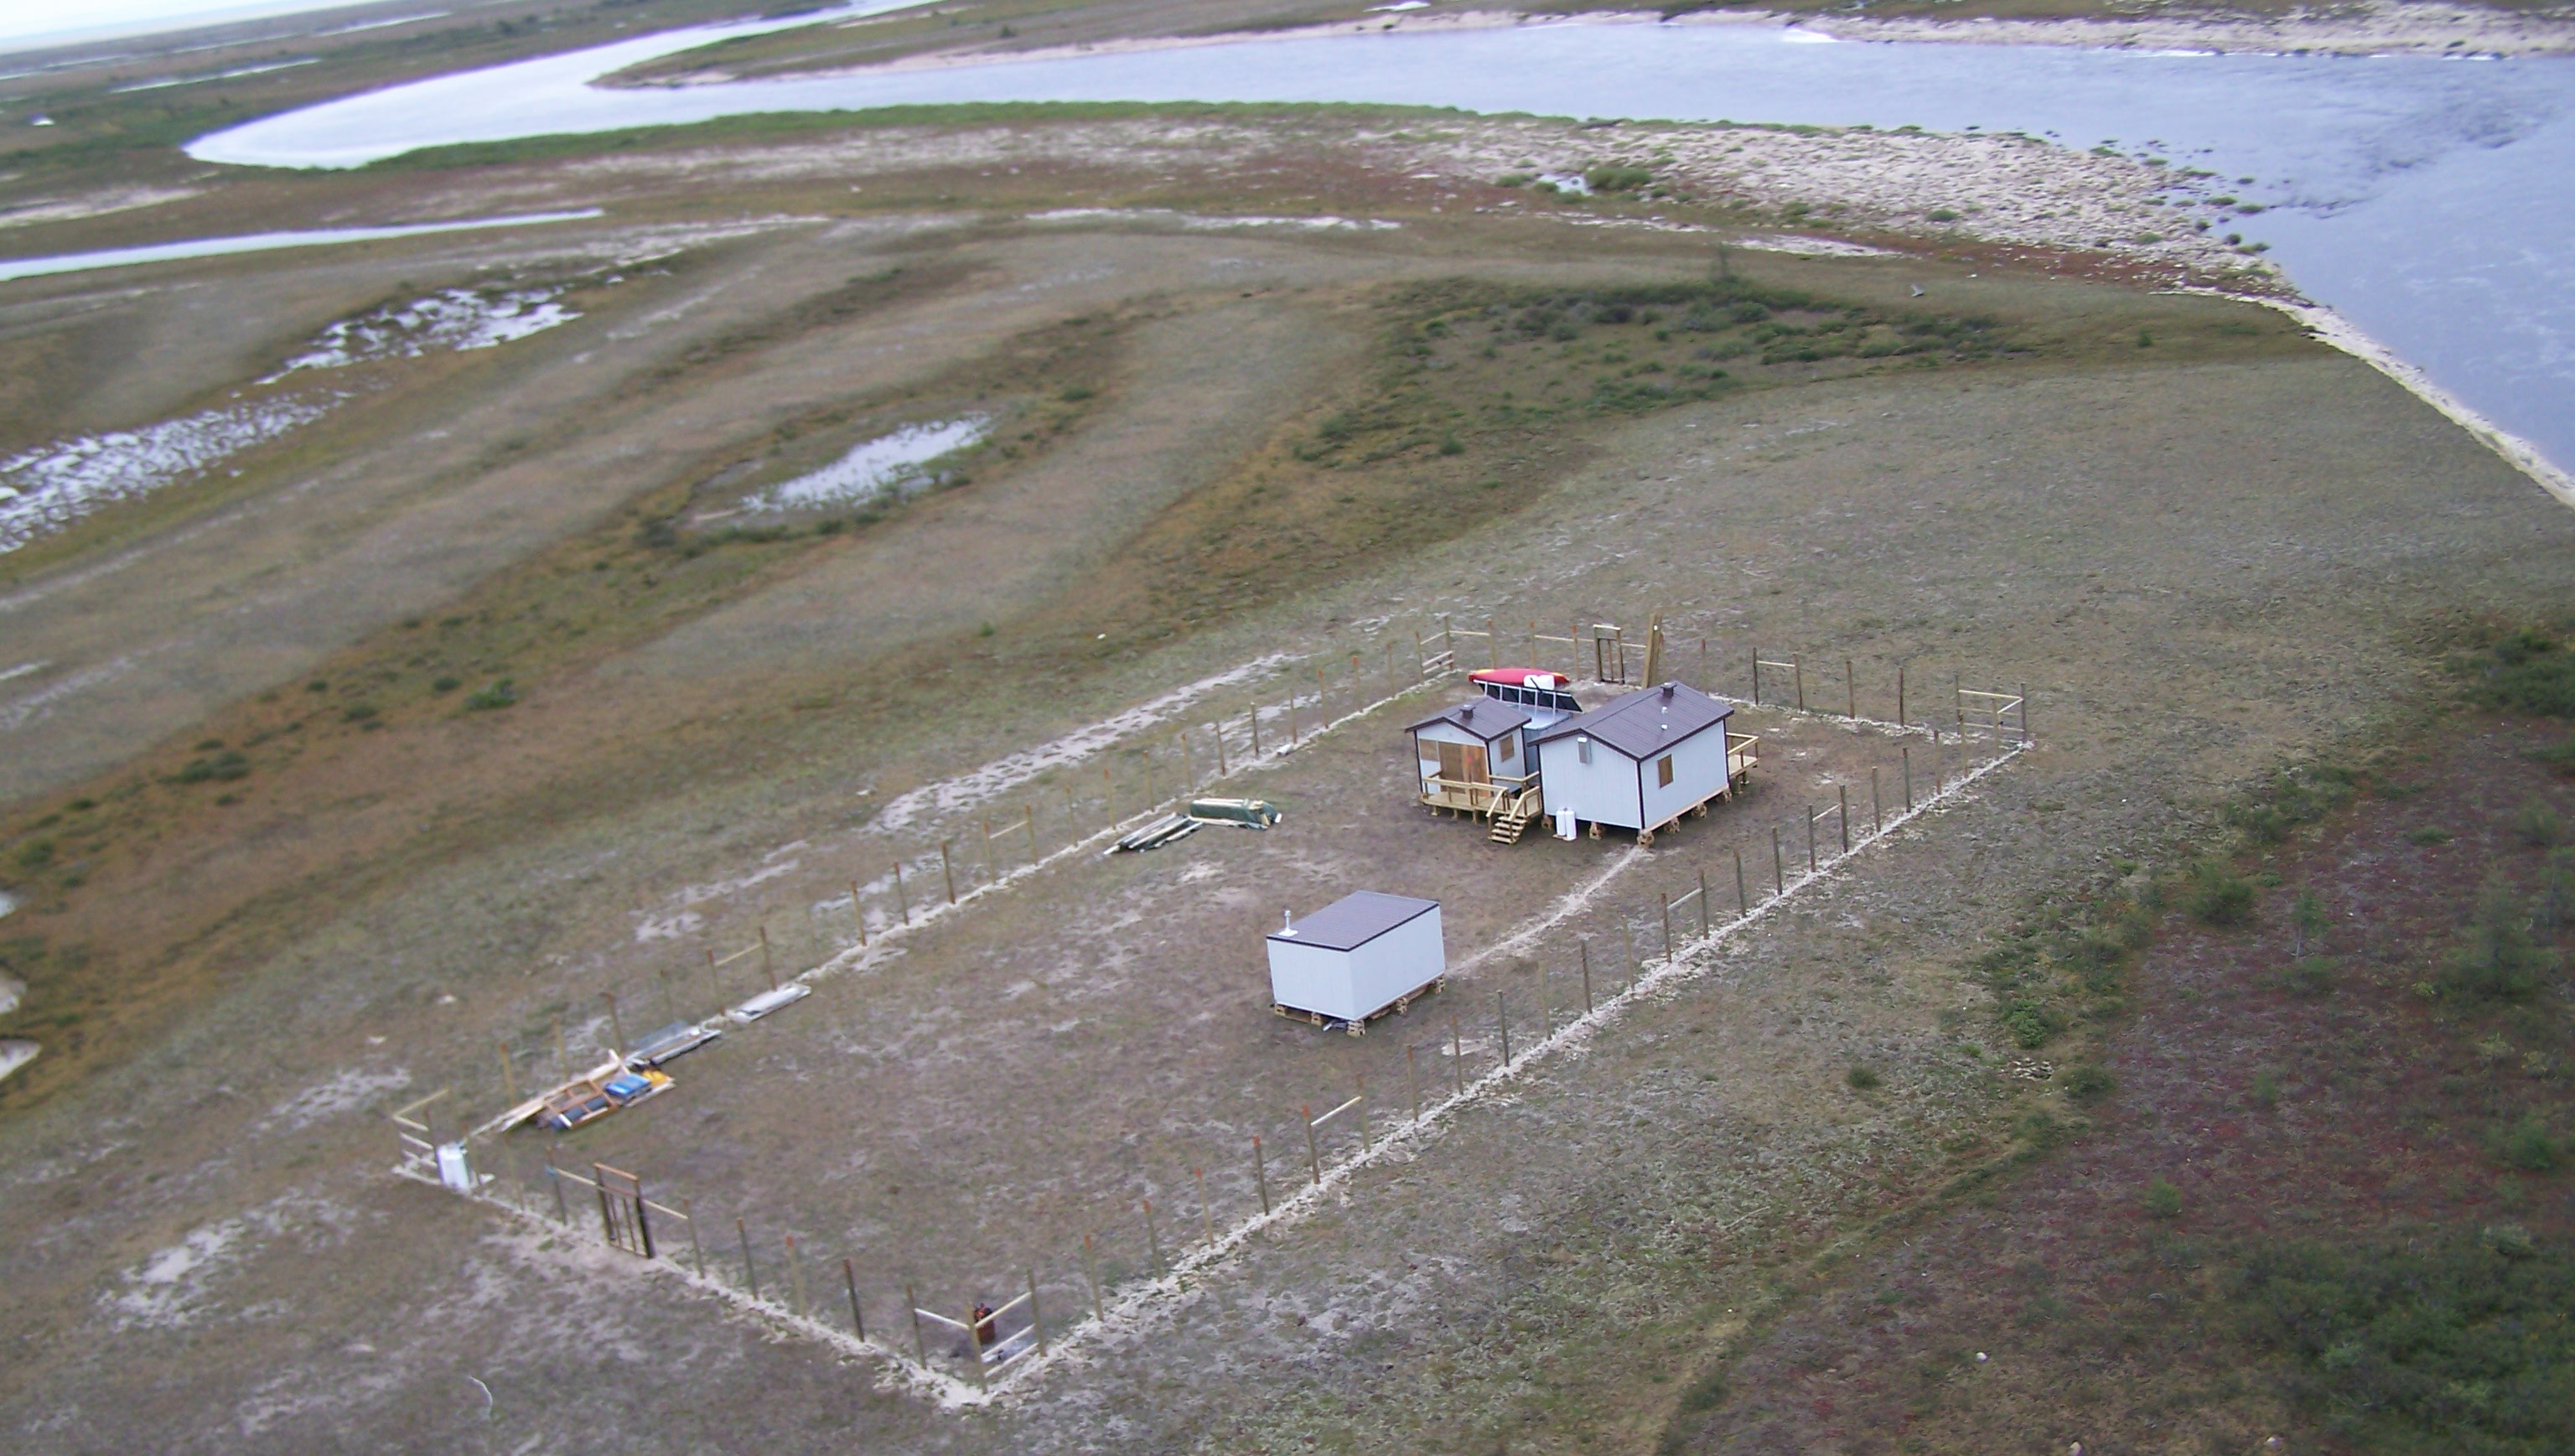 Aerial view of the fenced-in buildings at the Broad River compound.